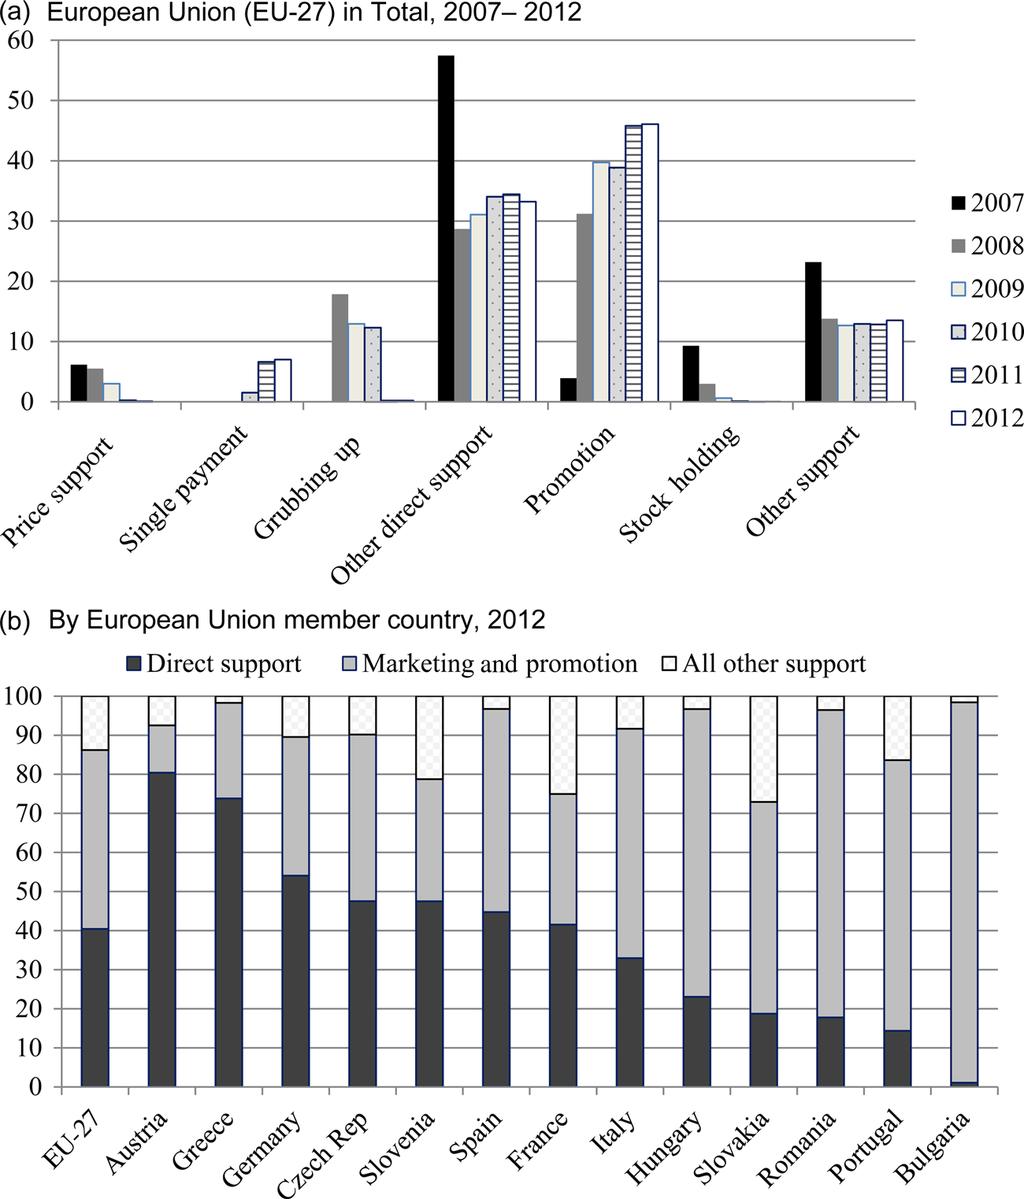 Kym Anderson and Hans G. Jensen 295 Figure 3 Shares of European Union Wine Producer Supports by Measure, 2007 2012 (%) Fig.